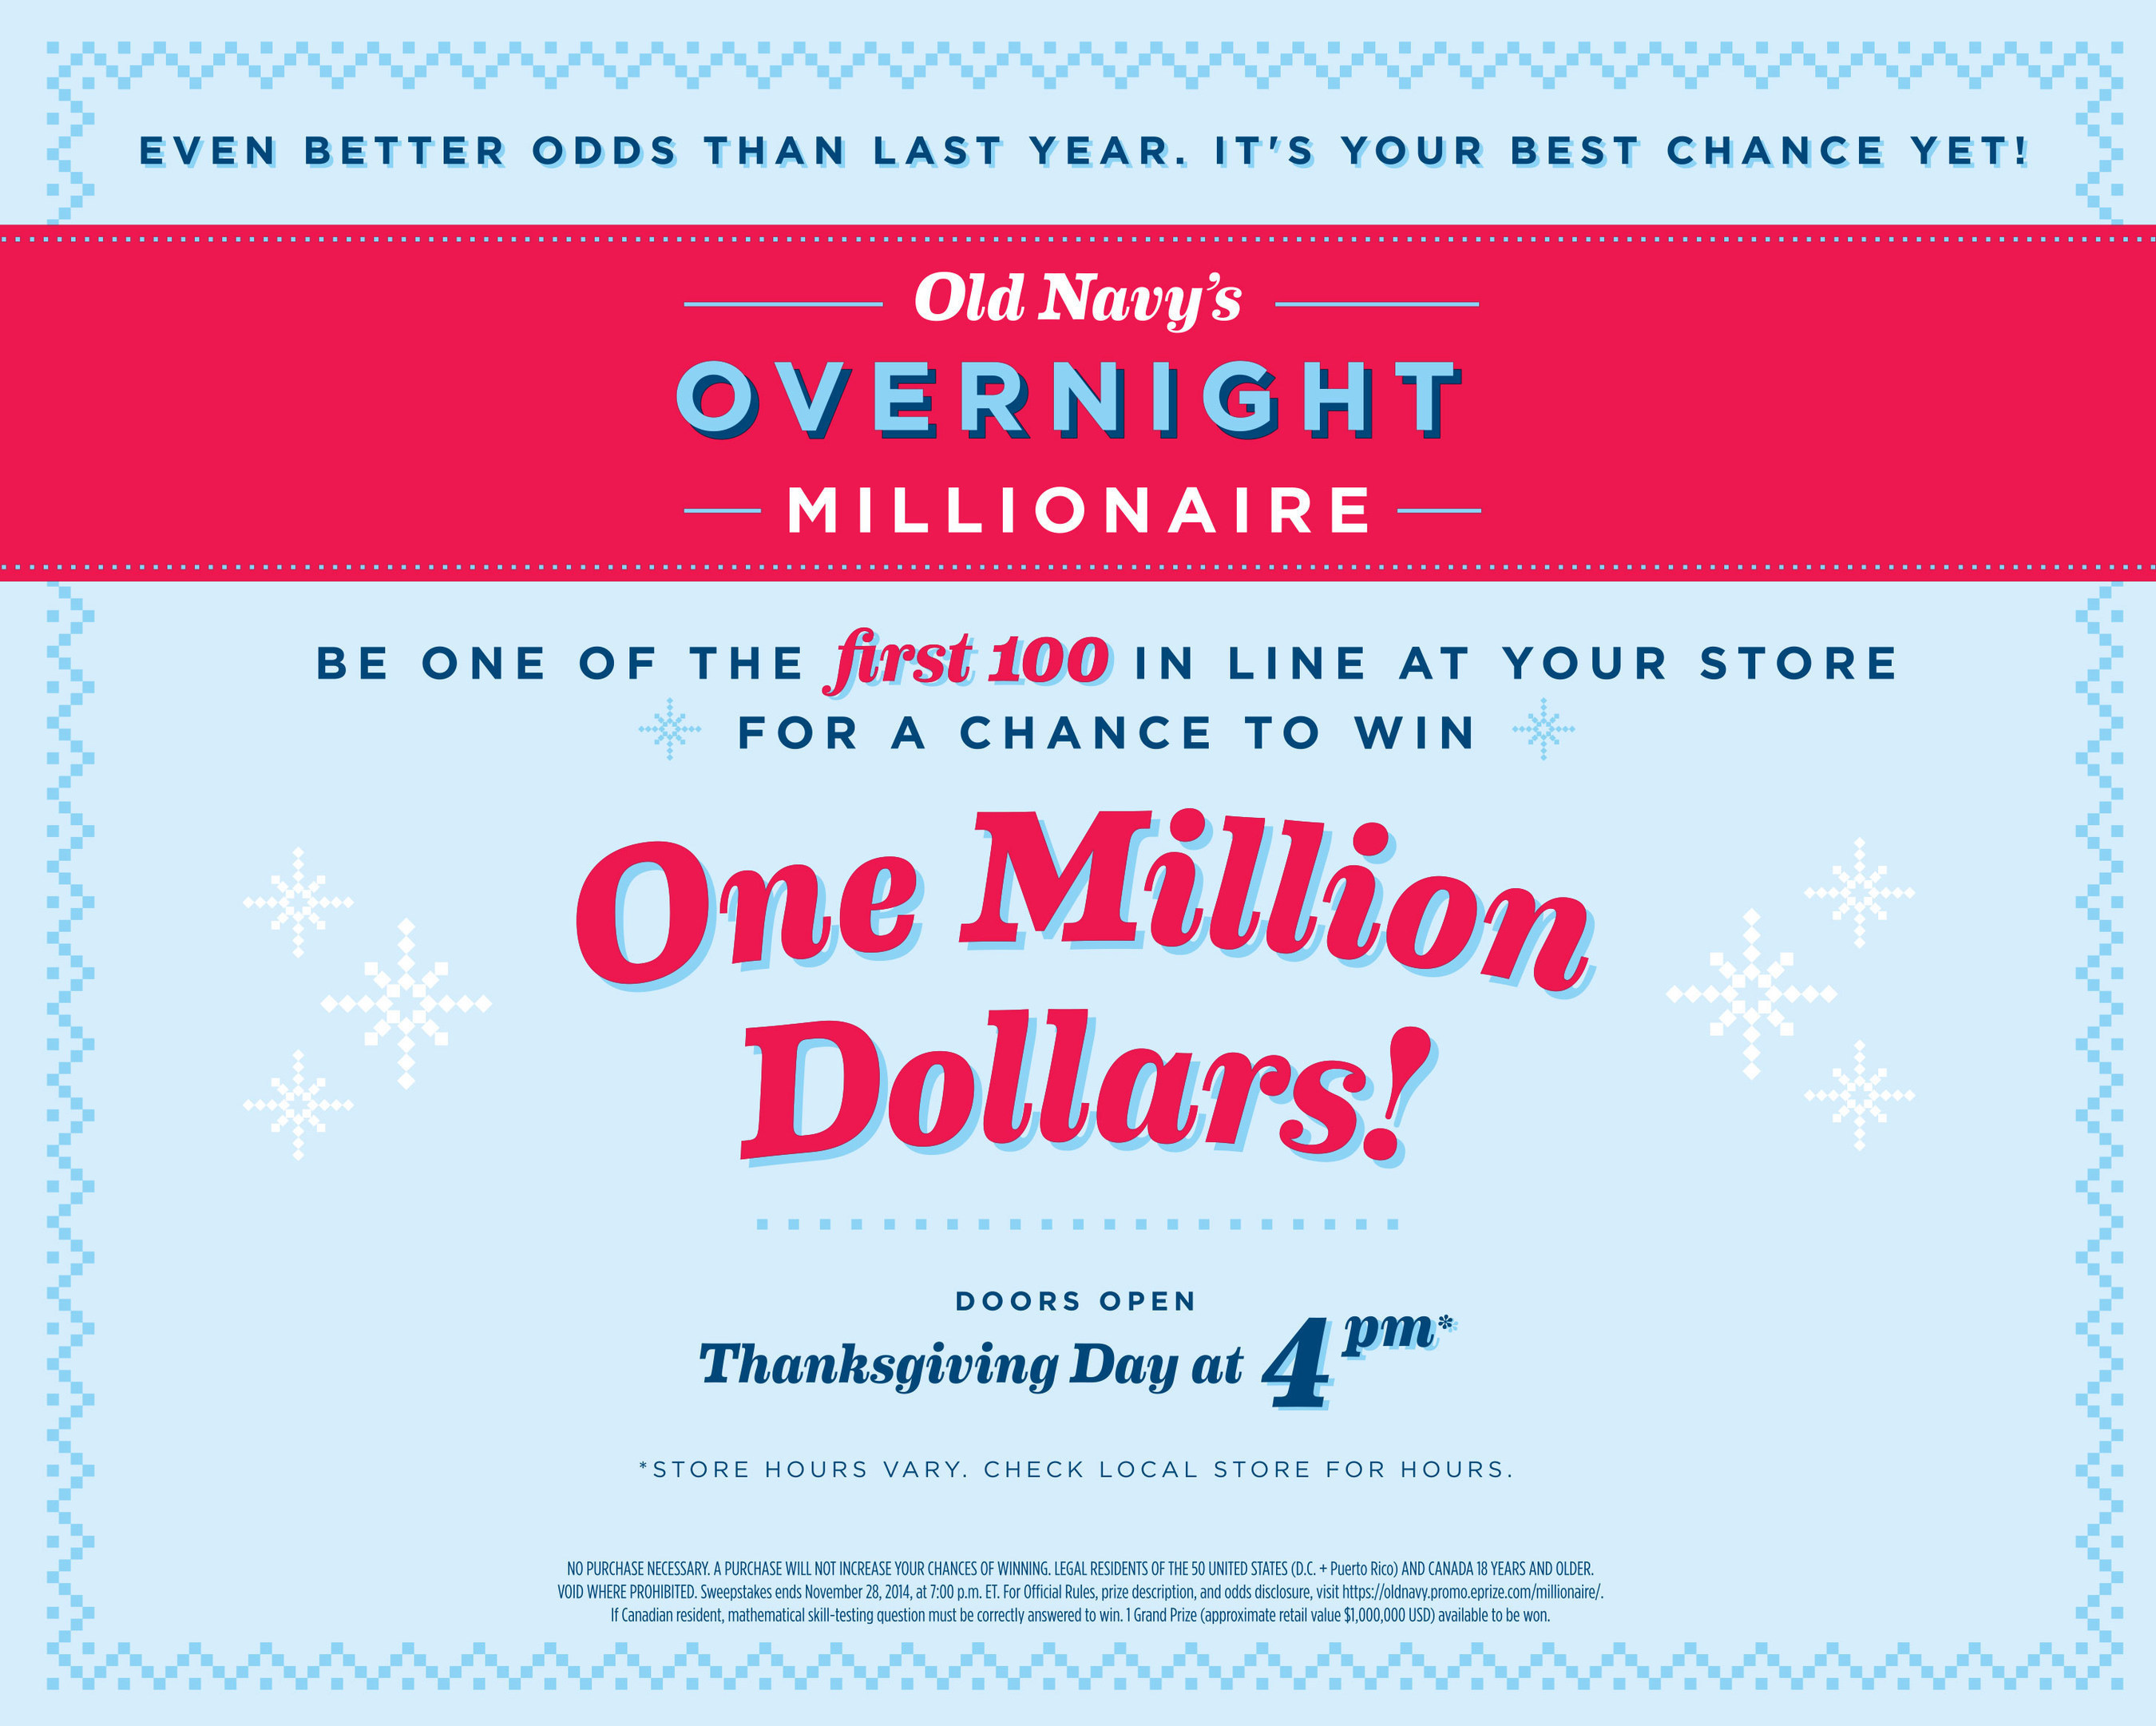 Old Navy to give away $1 million on Black Friday